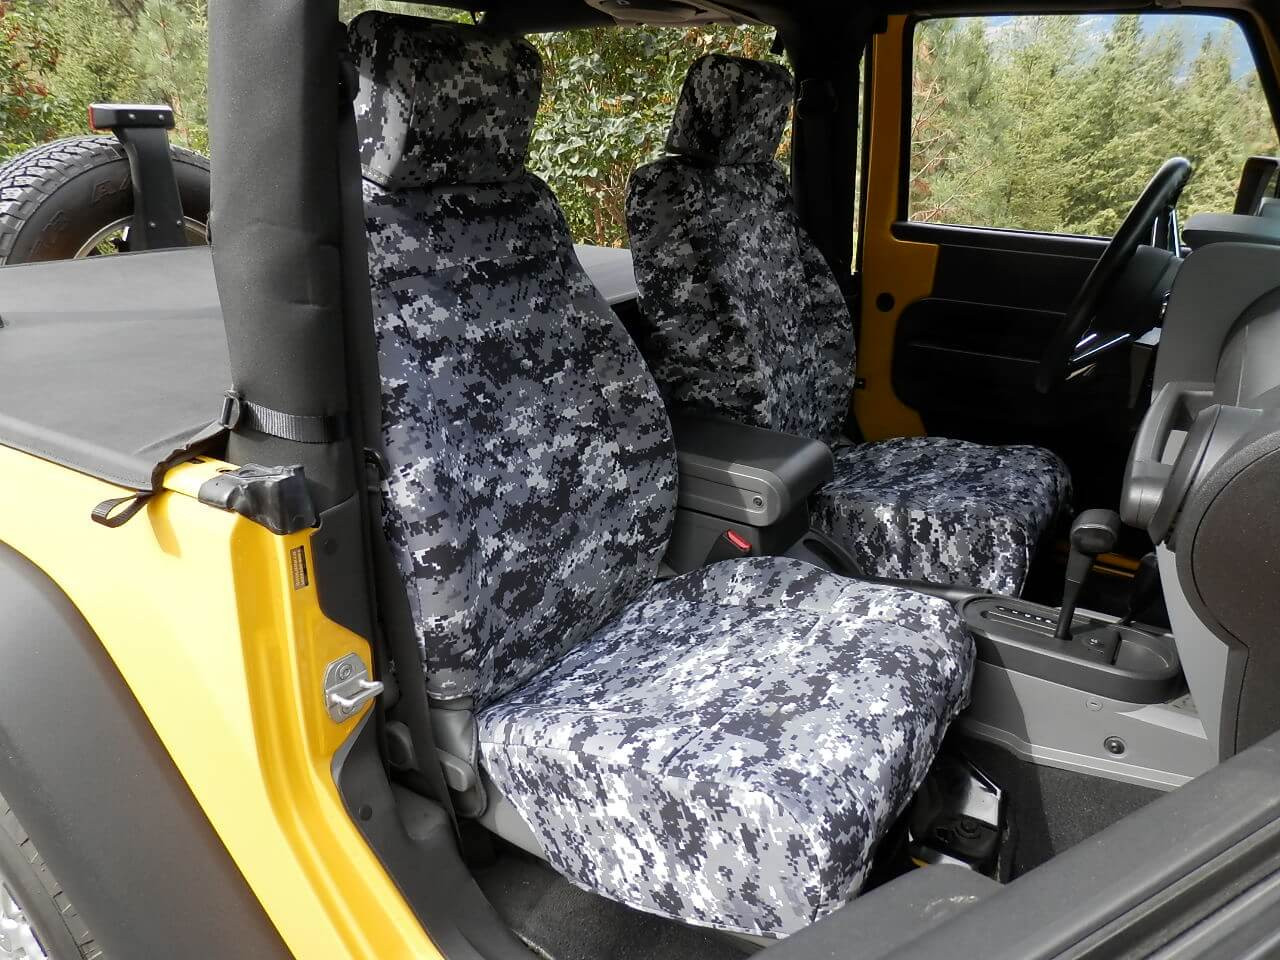 Military Seat Covers | Military Camo Seat Covers in a Variety of Styles